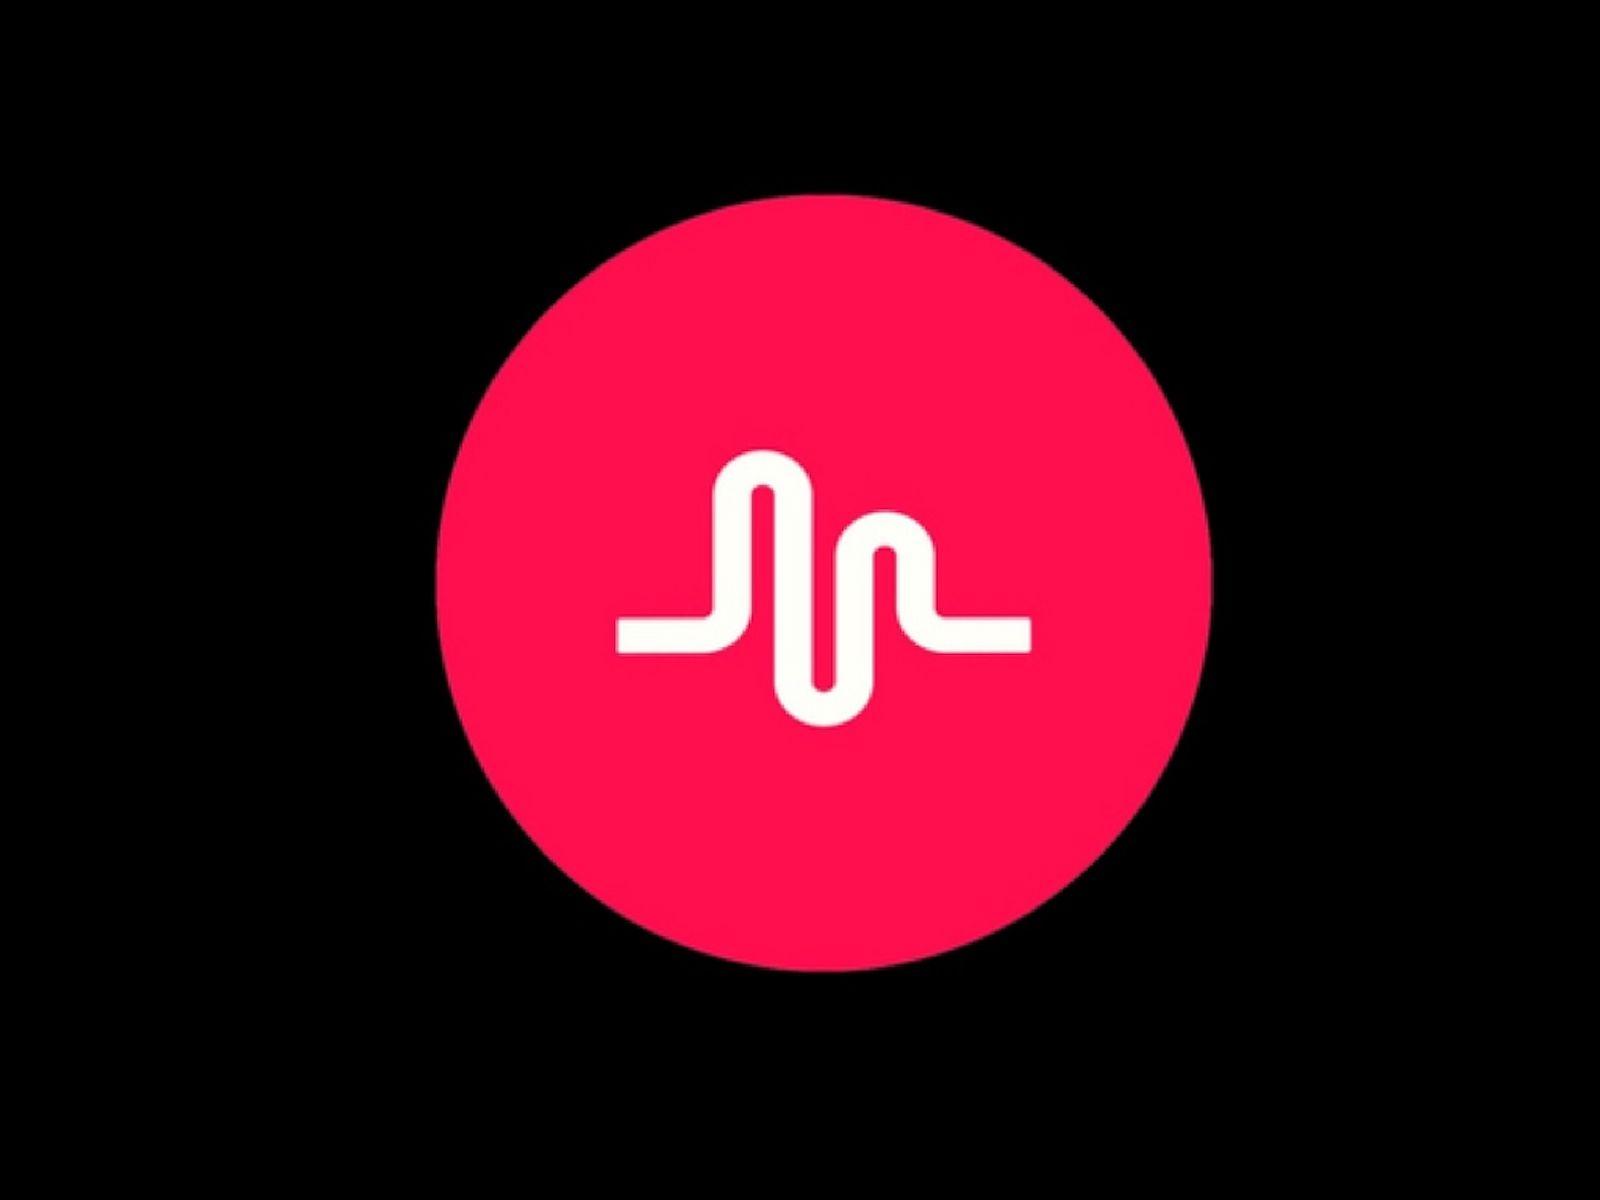 Small Musically Logo - Other Apps Like Instagram That Are Just As Fun to Use